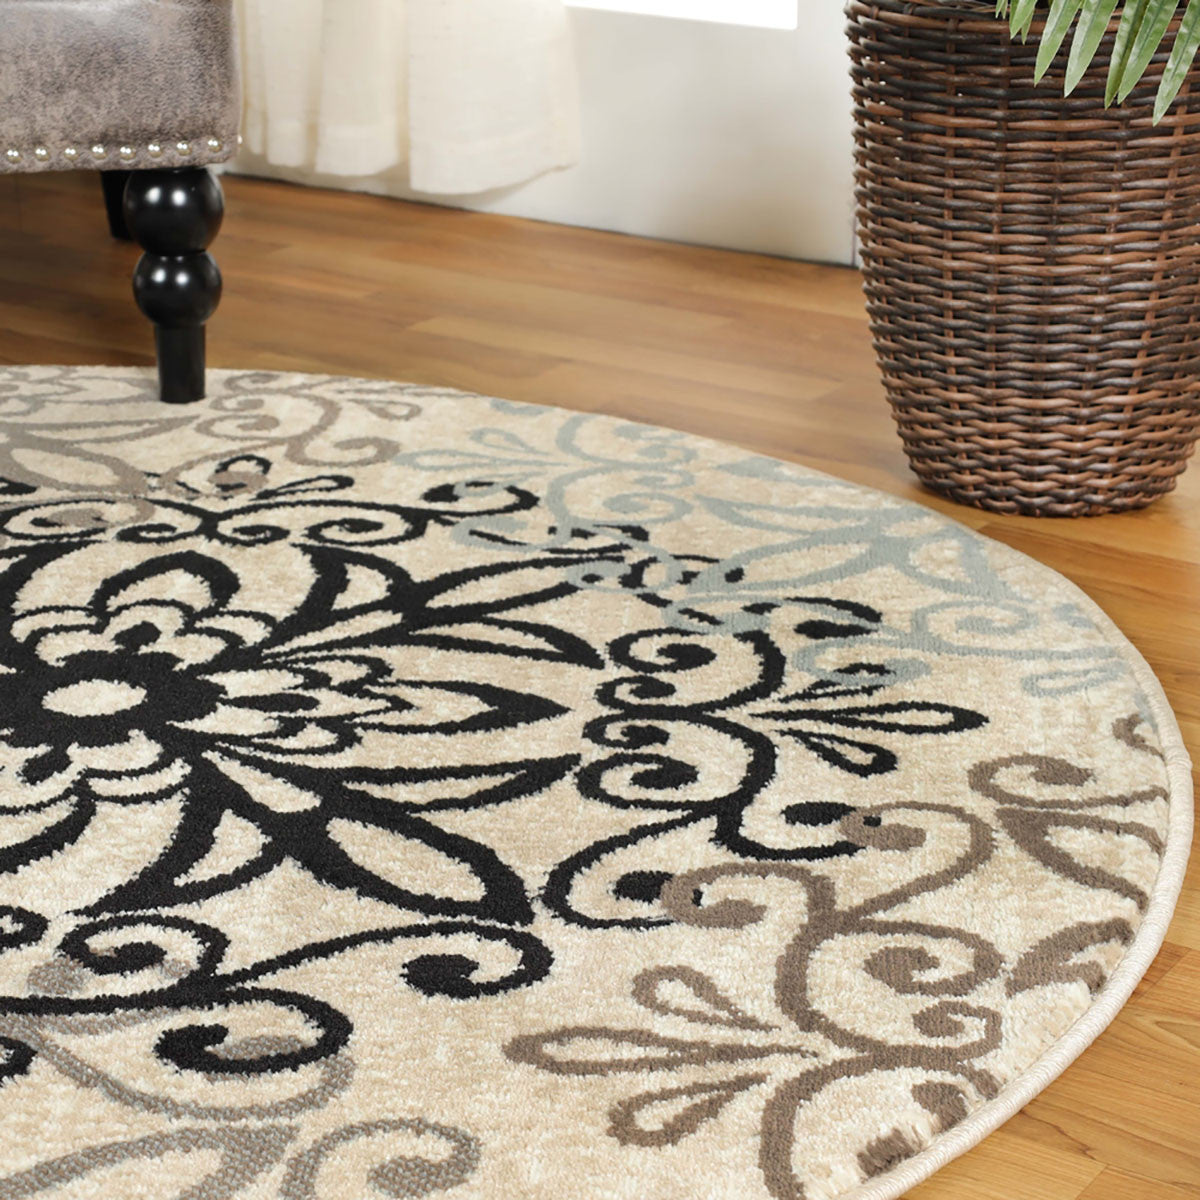 8' Round Tan Gray And Black Round Floral Medallion Stain Resistant Area Rug